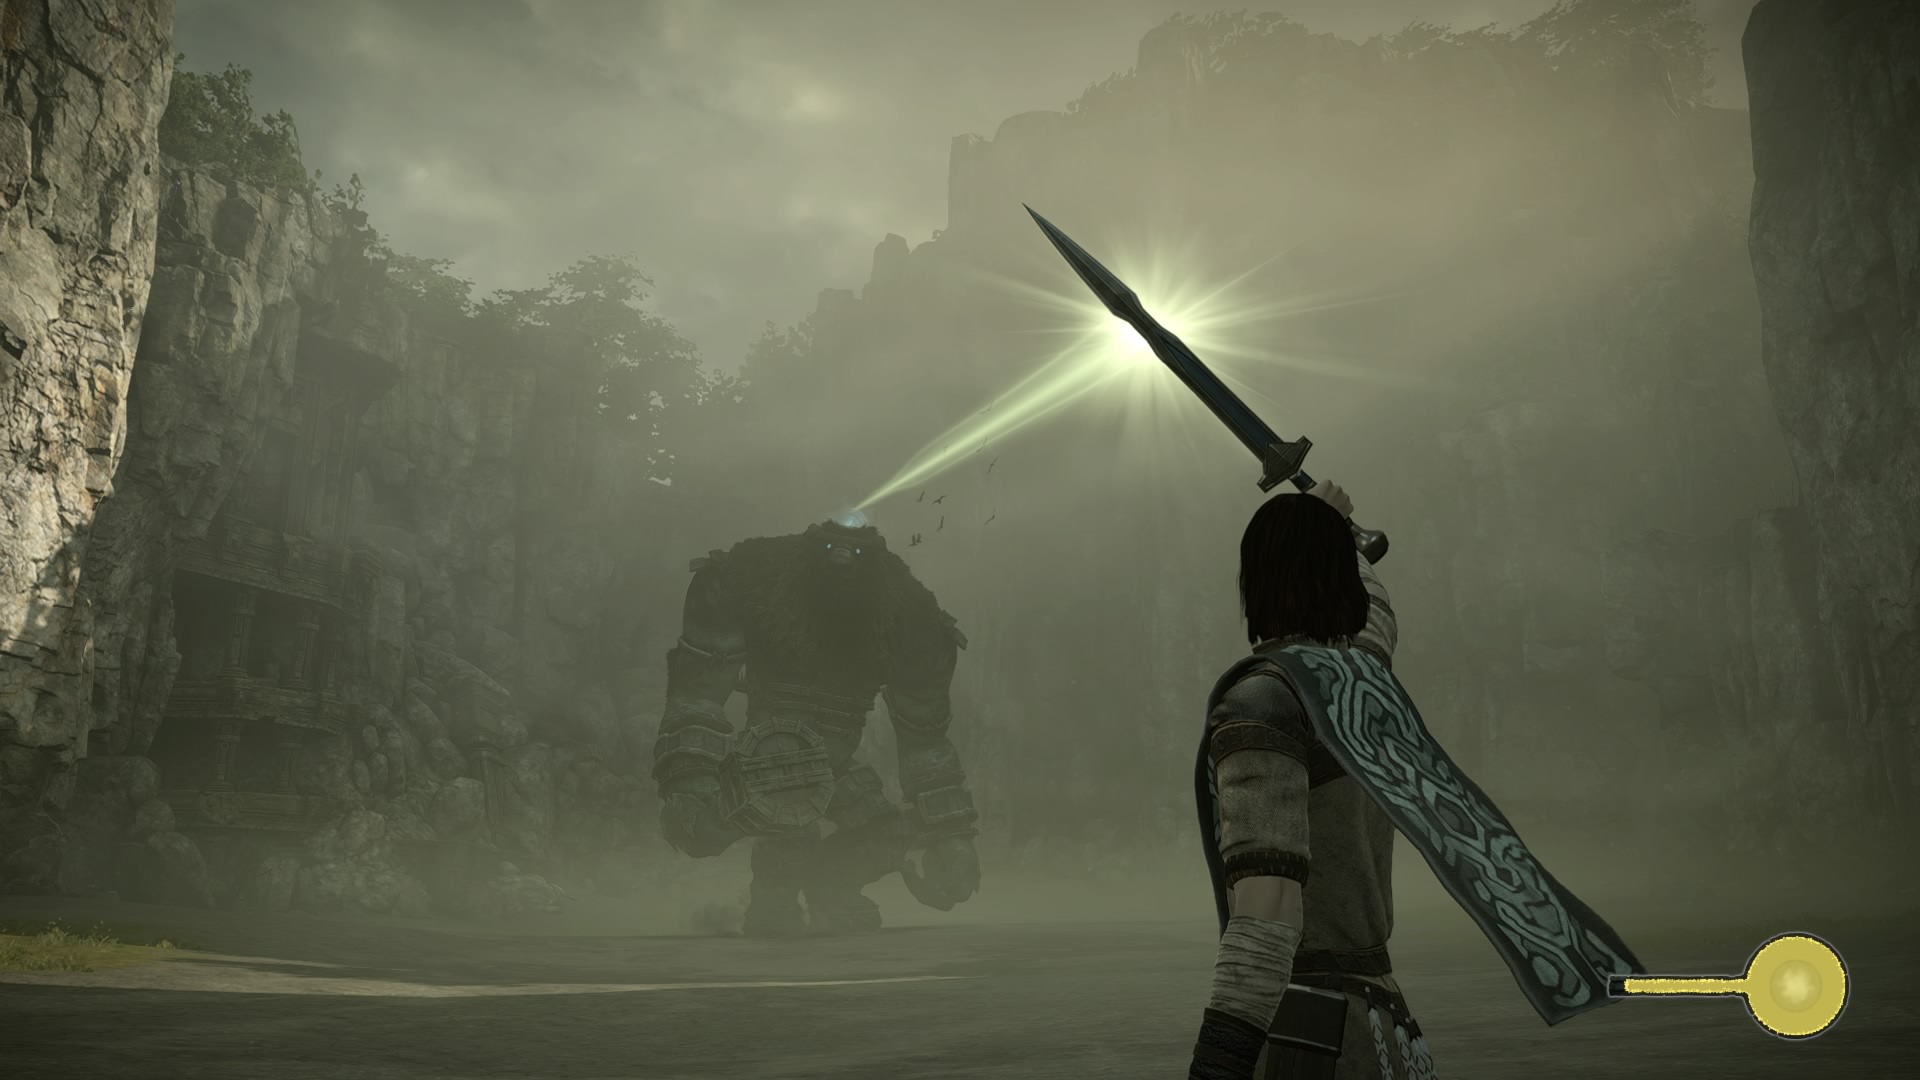 Shadow of the Colossus PS4 Gameplay Walkthrough Part 1 - 1st & 2nd Colossus  